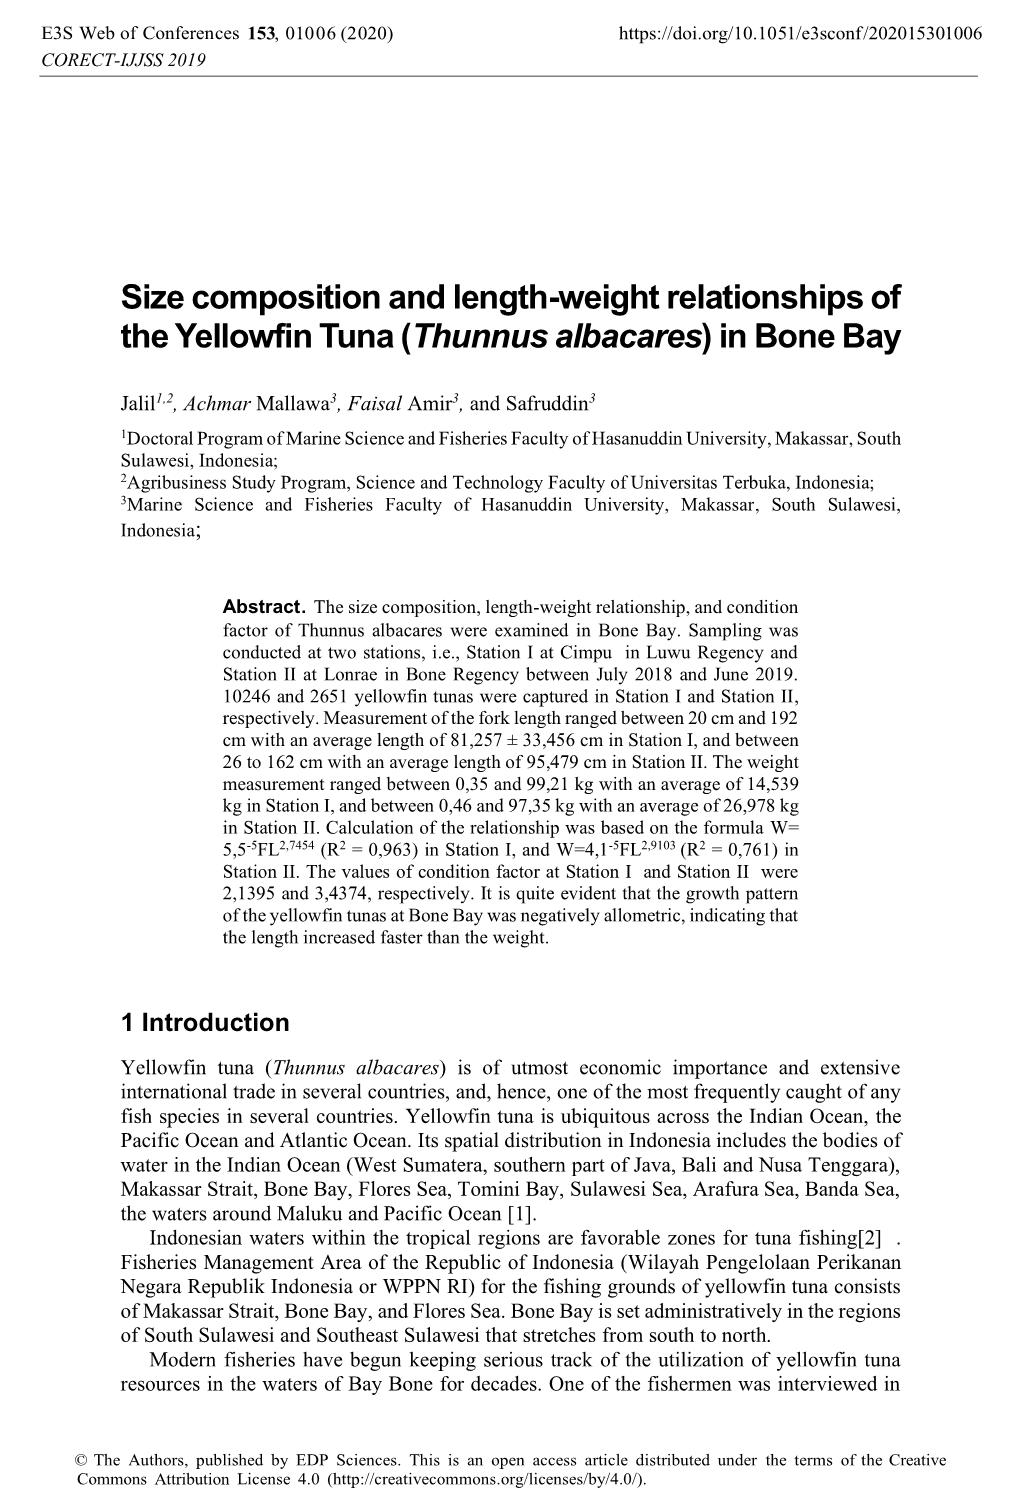 Size Composition and Length-Weight Relationships of the Yellowfin Tuna (Thunnus Albacares) in Bone Bay